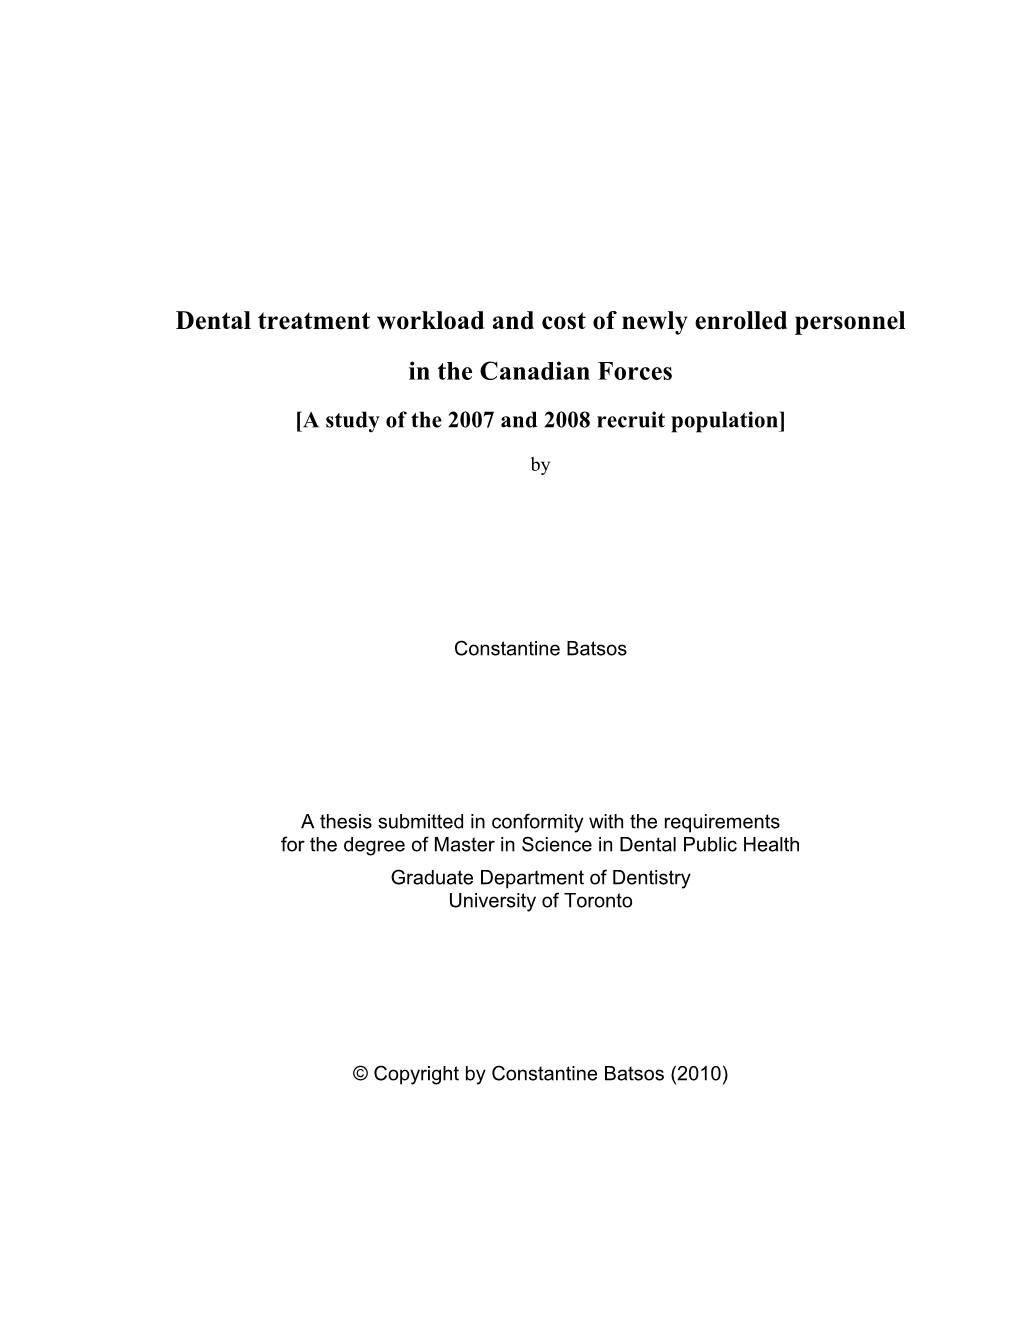 Dental Treatment Workload and Cost of Newly Enrolled Personnel in the Canadian Forces